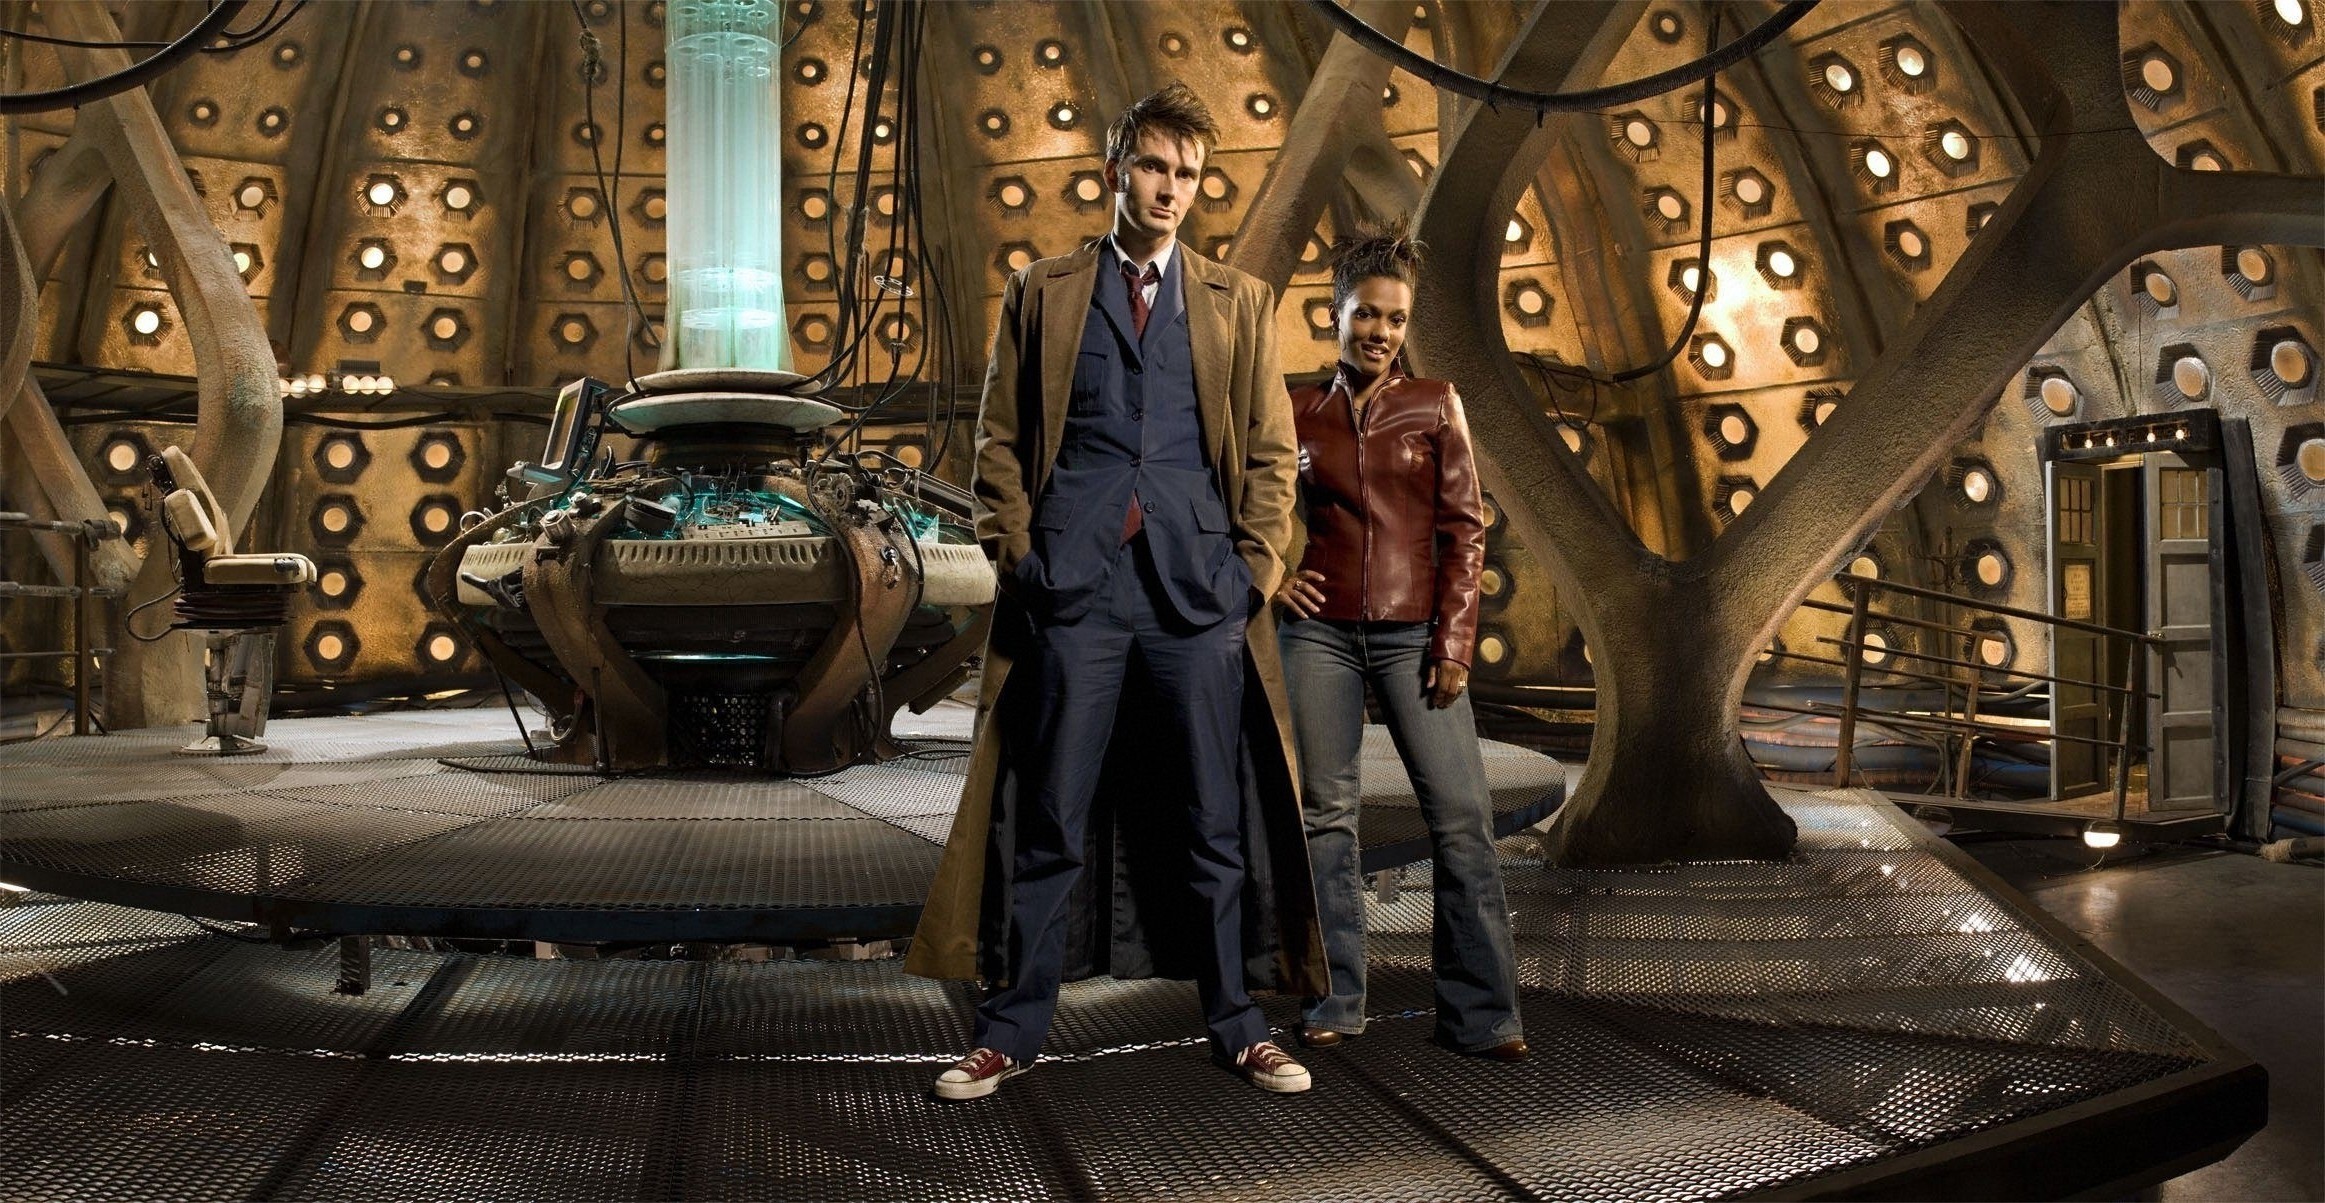 Doctor Who, The Doctor, TARDIS, David Tennant, Freema Agyeman, Tenth Doctor Wallpapers HD / Desktop and Mobile Backgrounds